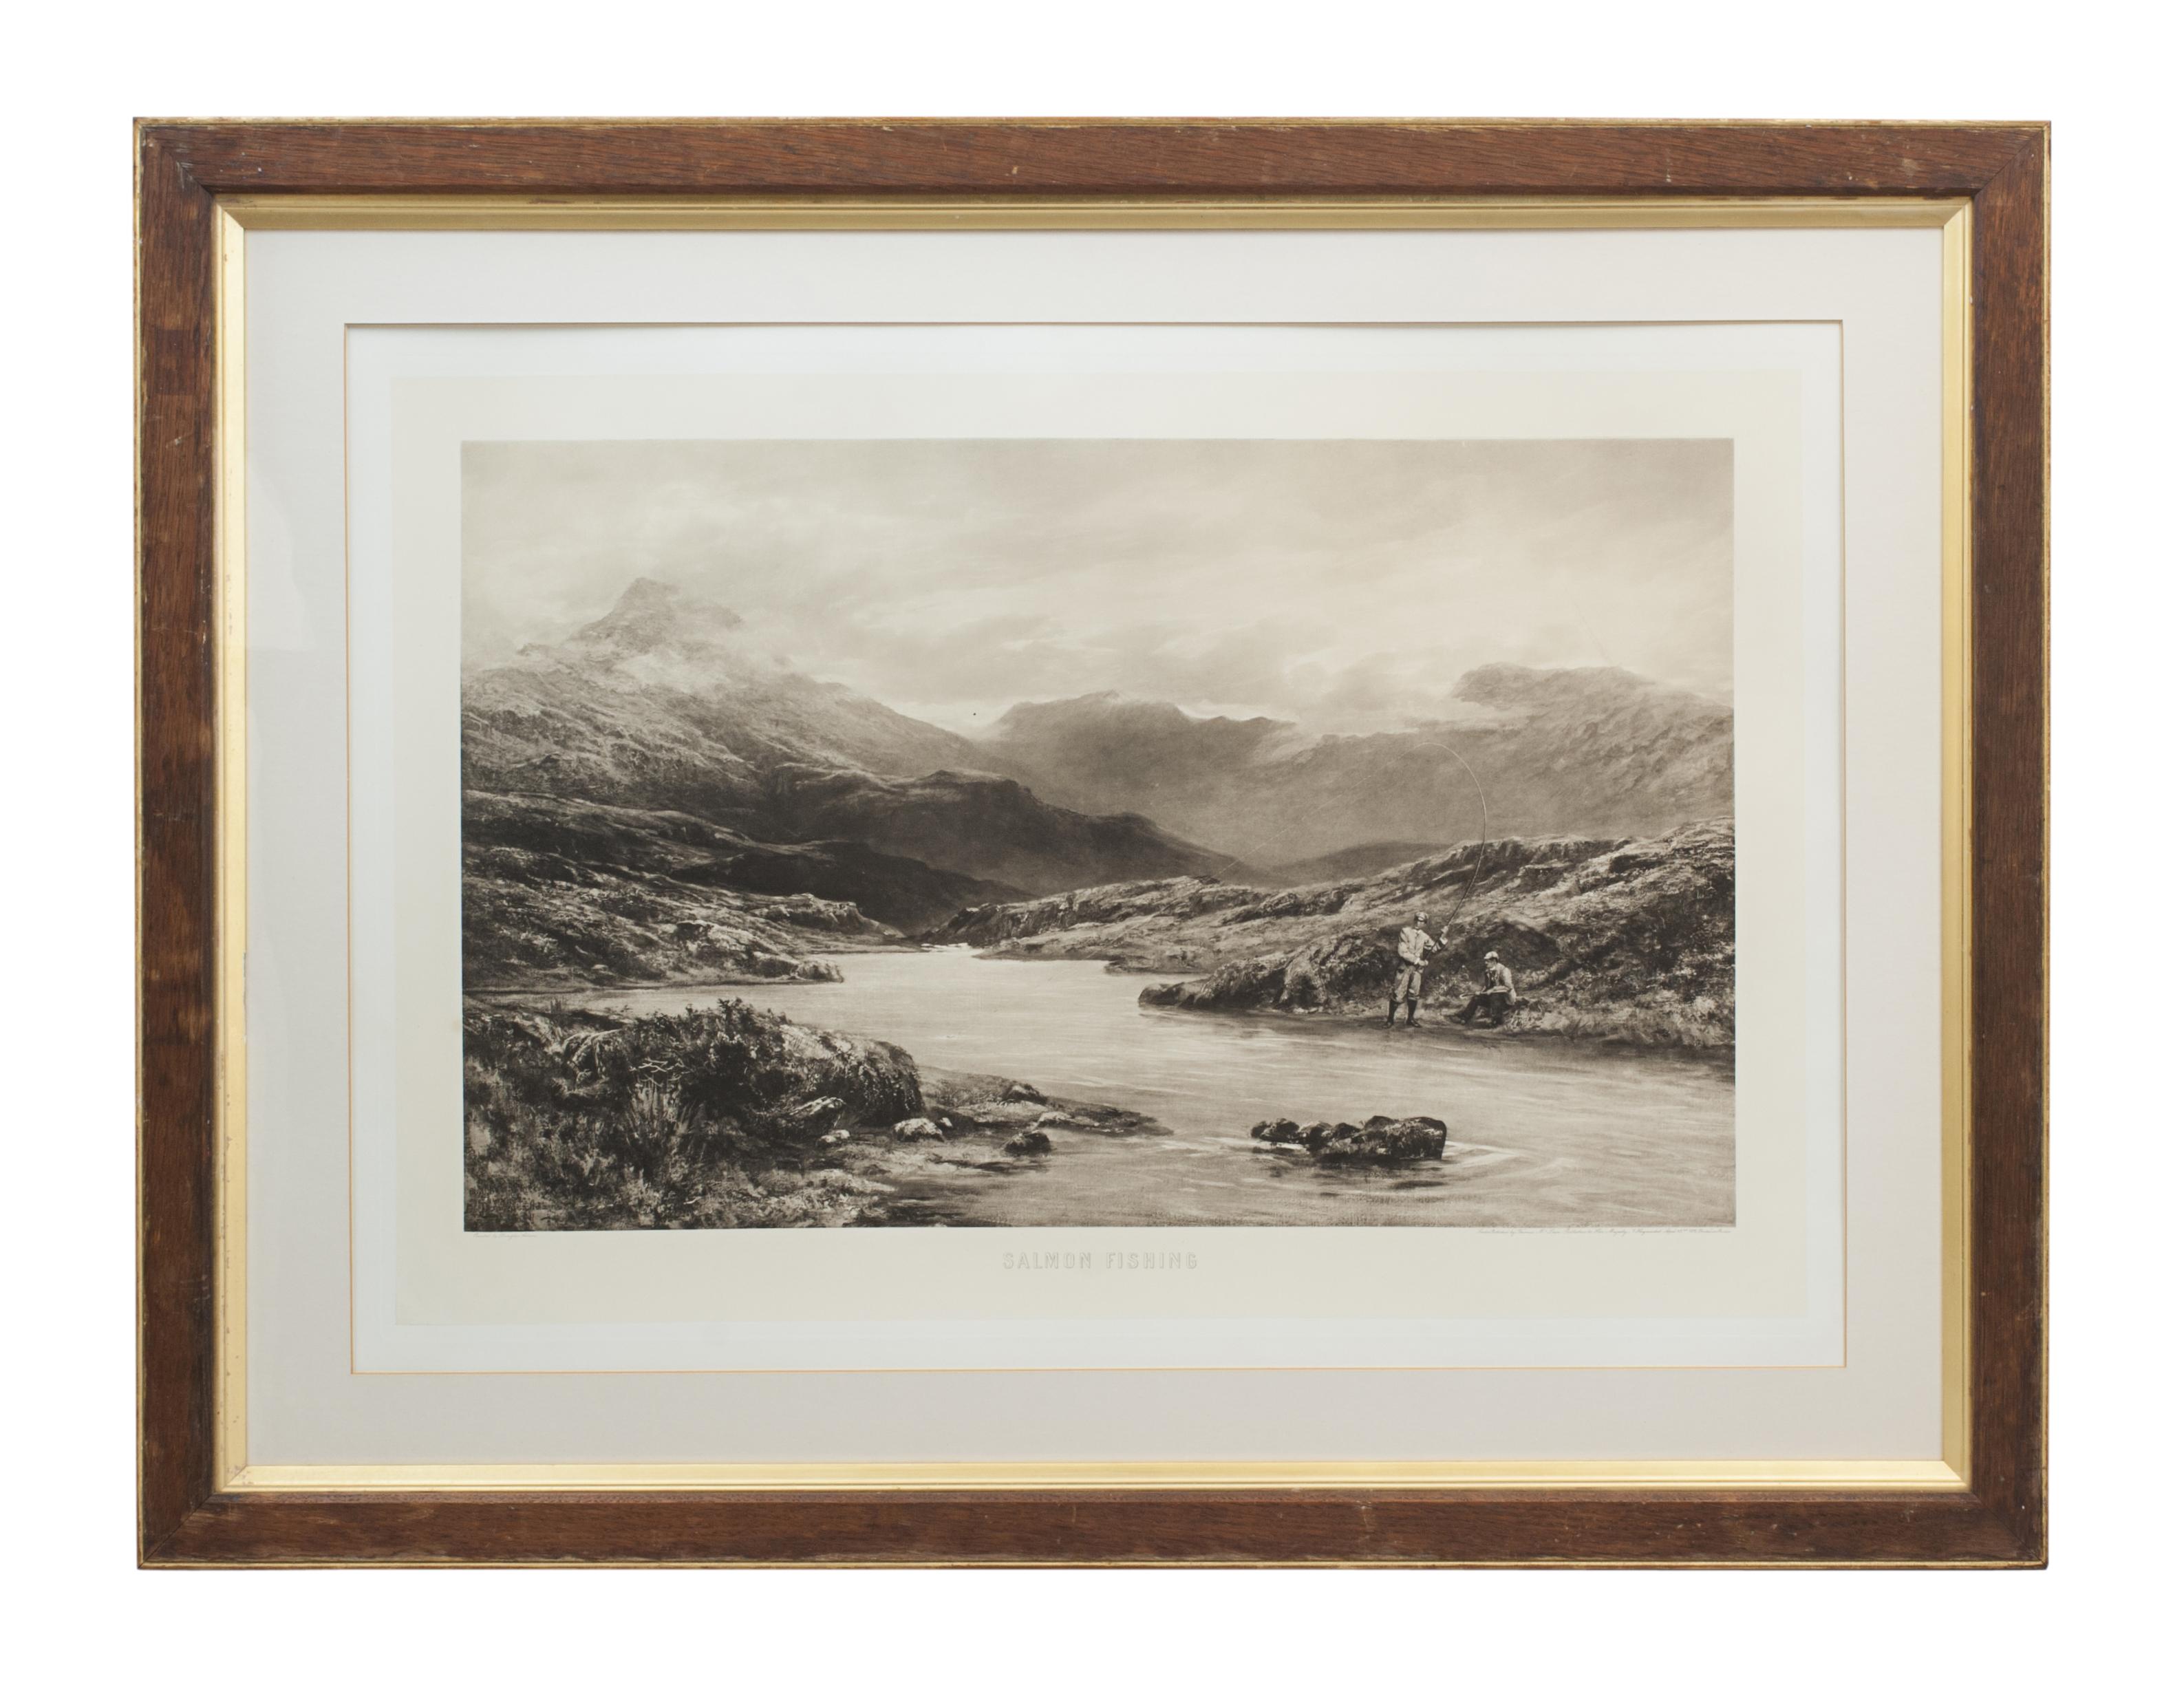 Salmon Fishing by Douglas Adams.
A large atmospheric highlands fishing photogravure taken from the original painting by Douglas Adams. The angling picture is known as 'Salmon Fishing' and was published April 22nd in 1892 and shows two fishermen in